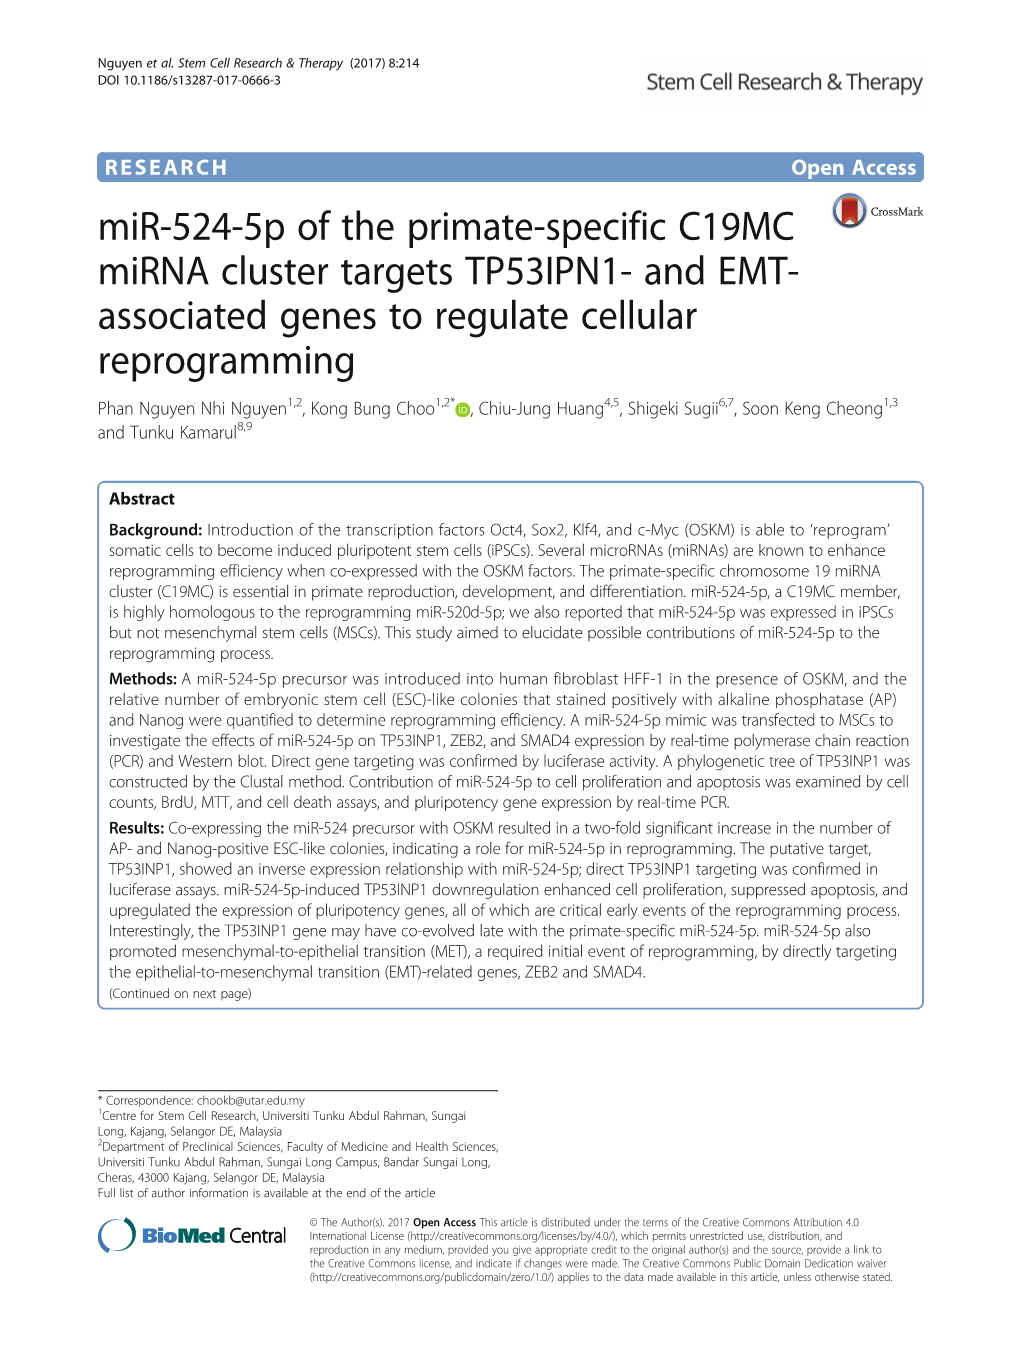 Mir-524-5P of the Primate-Specific C19MC Mirna Cluster Targets TP53IPN1- and EMT-Associated Genes to Regulate Cellular Reprogram